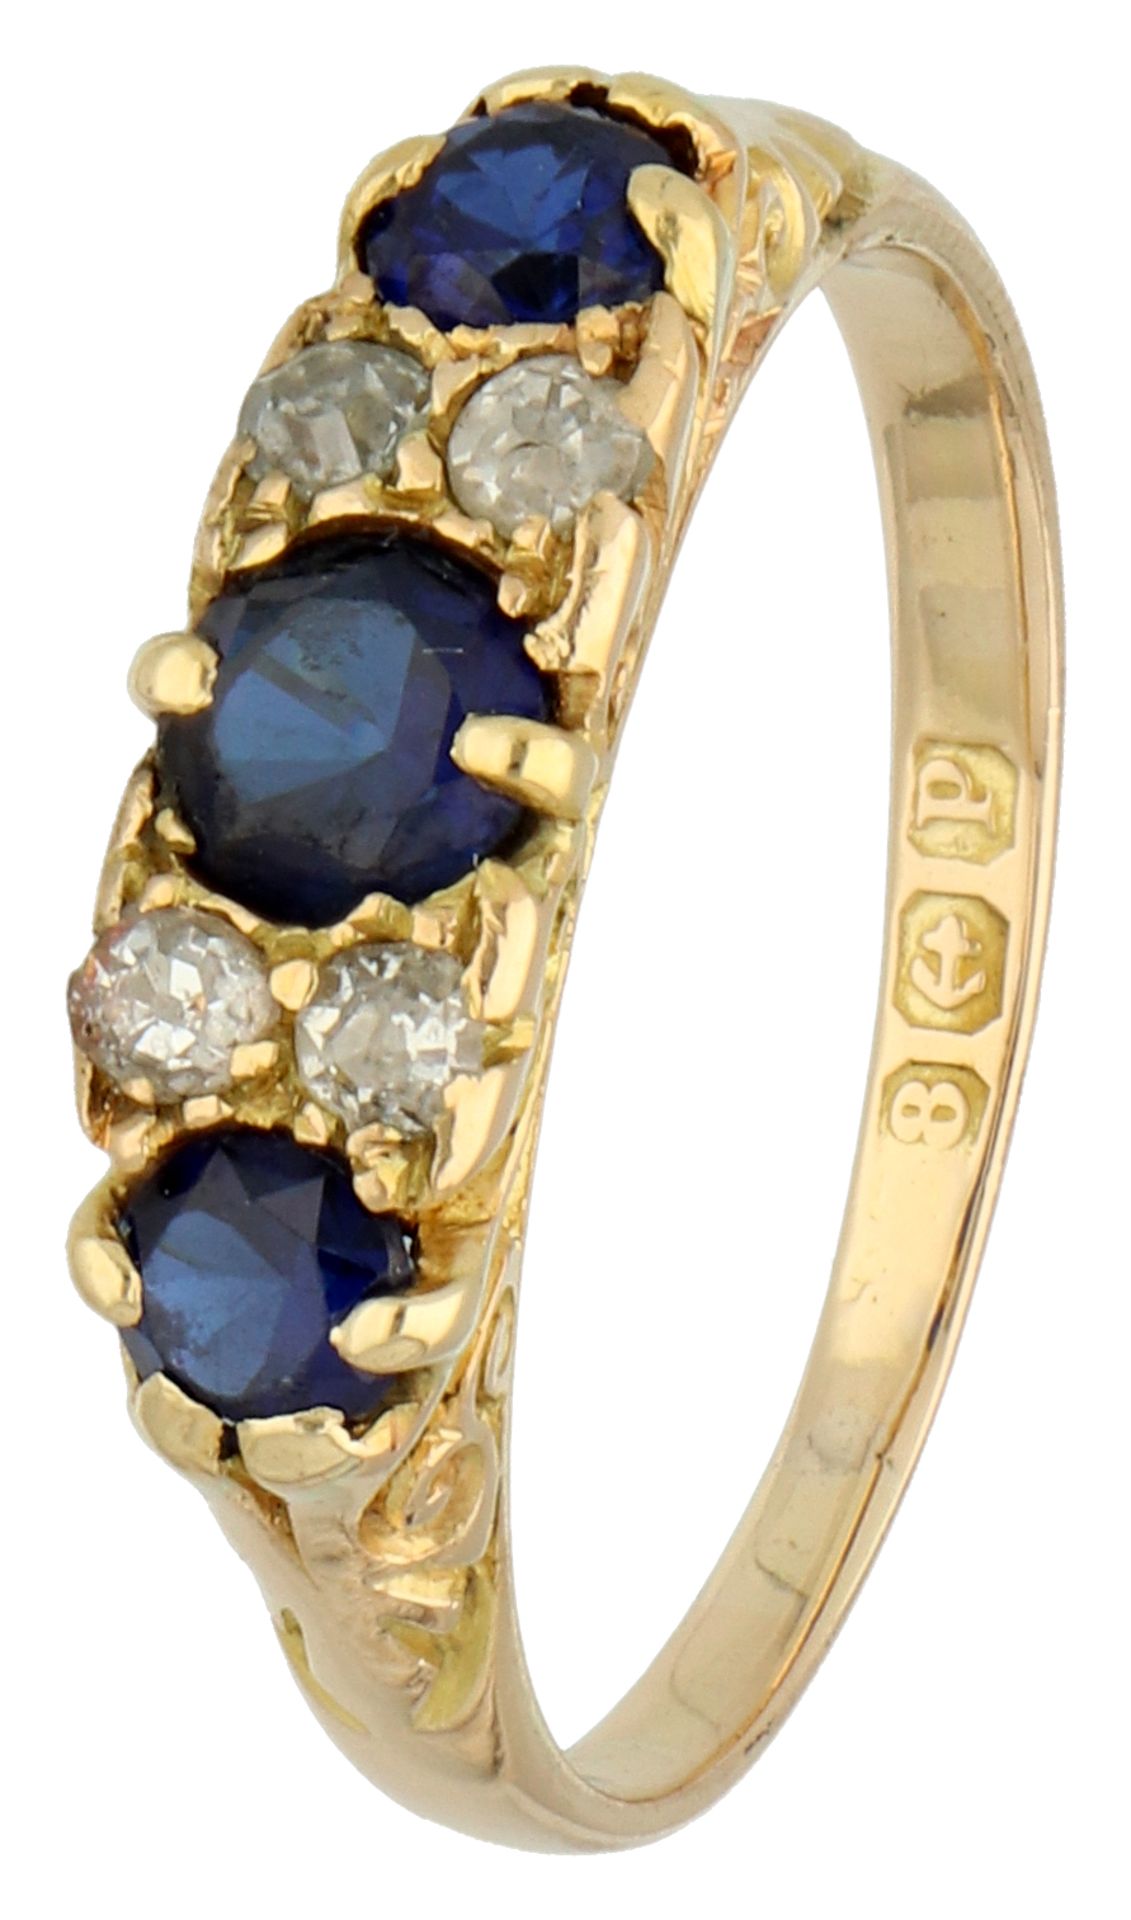 No reserve - 18K Yellow gold 3-stone ring with synthetic sapphire and diamond.